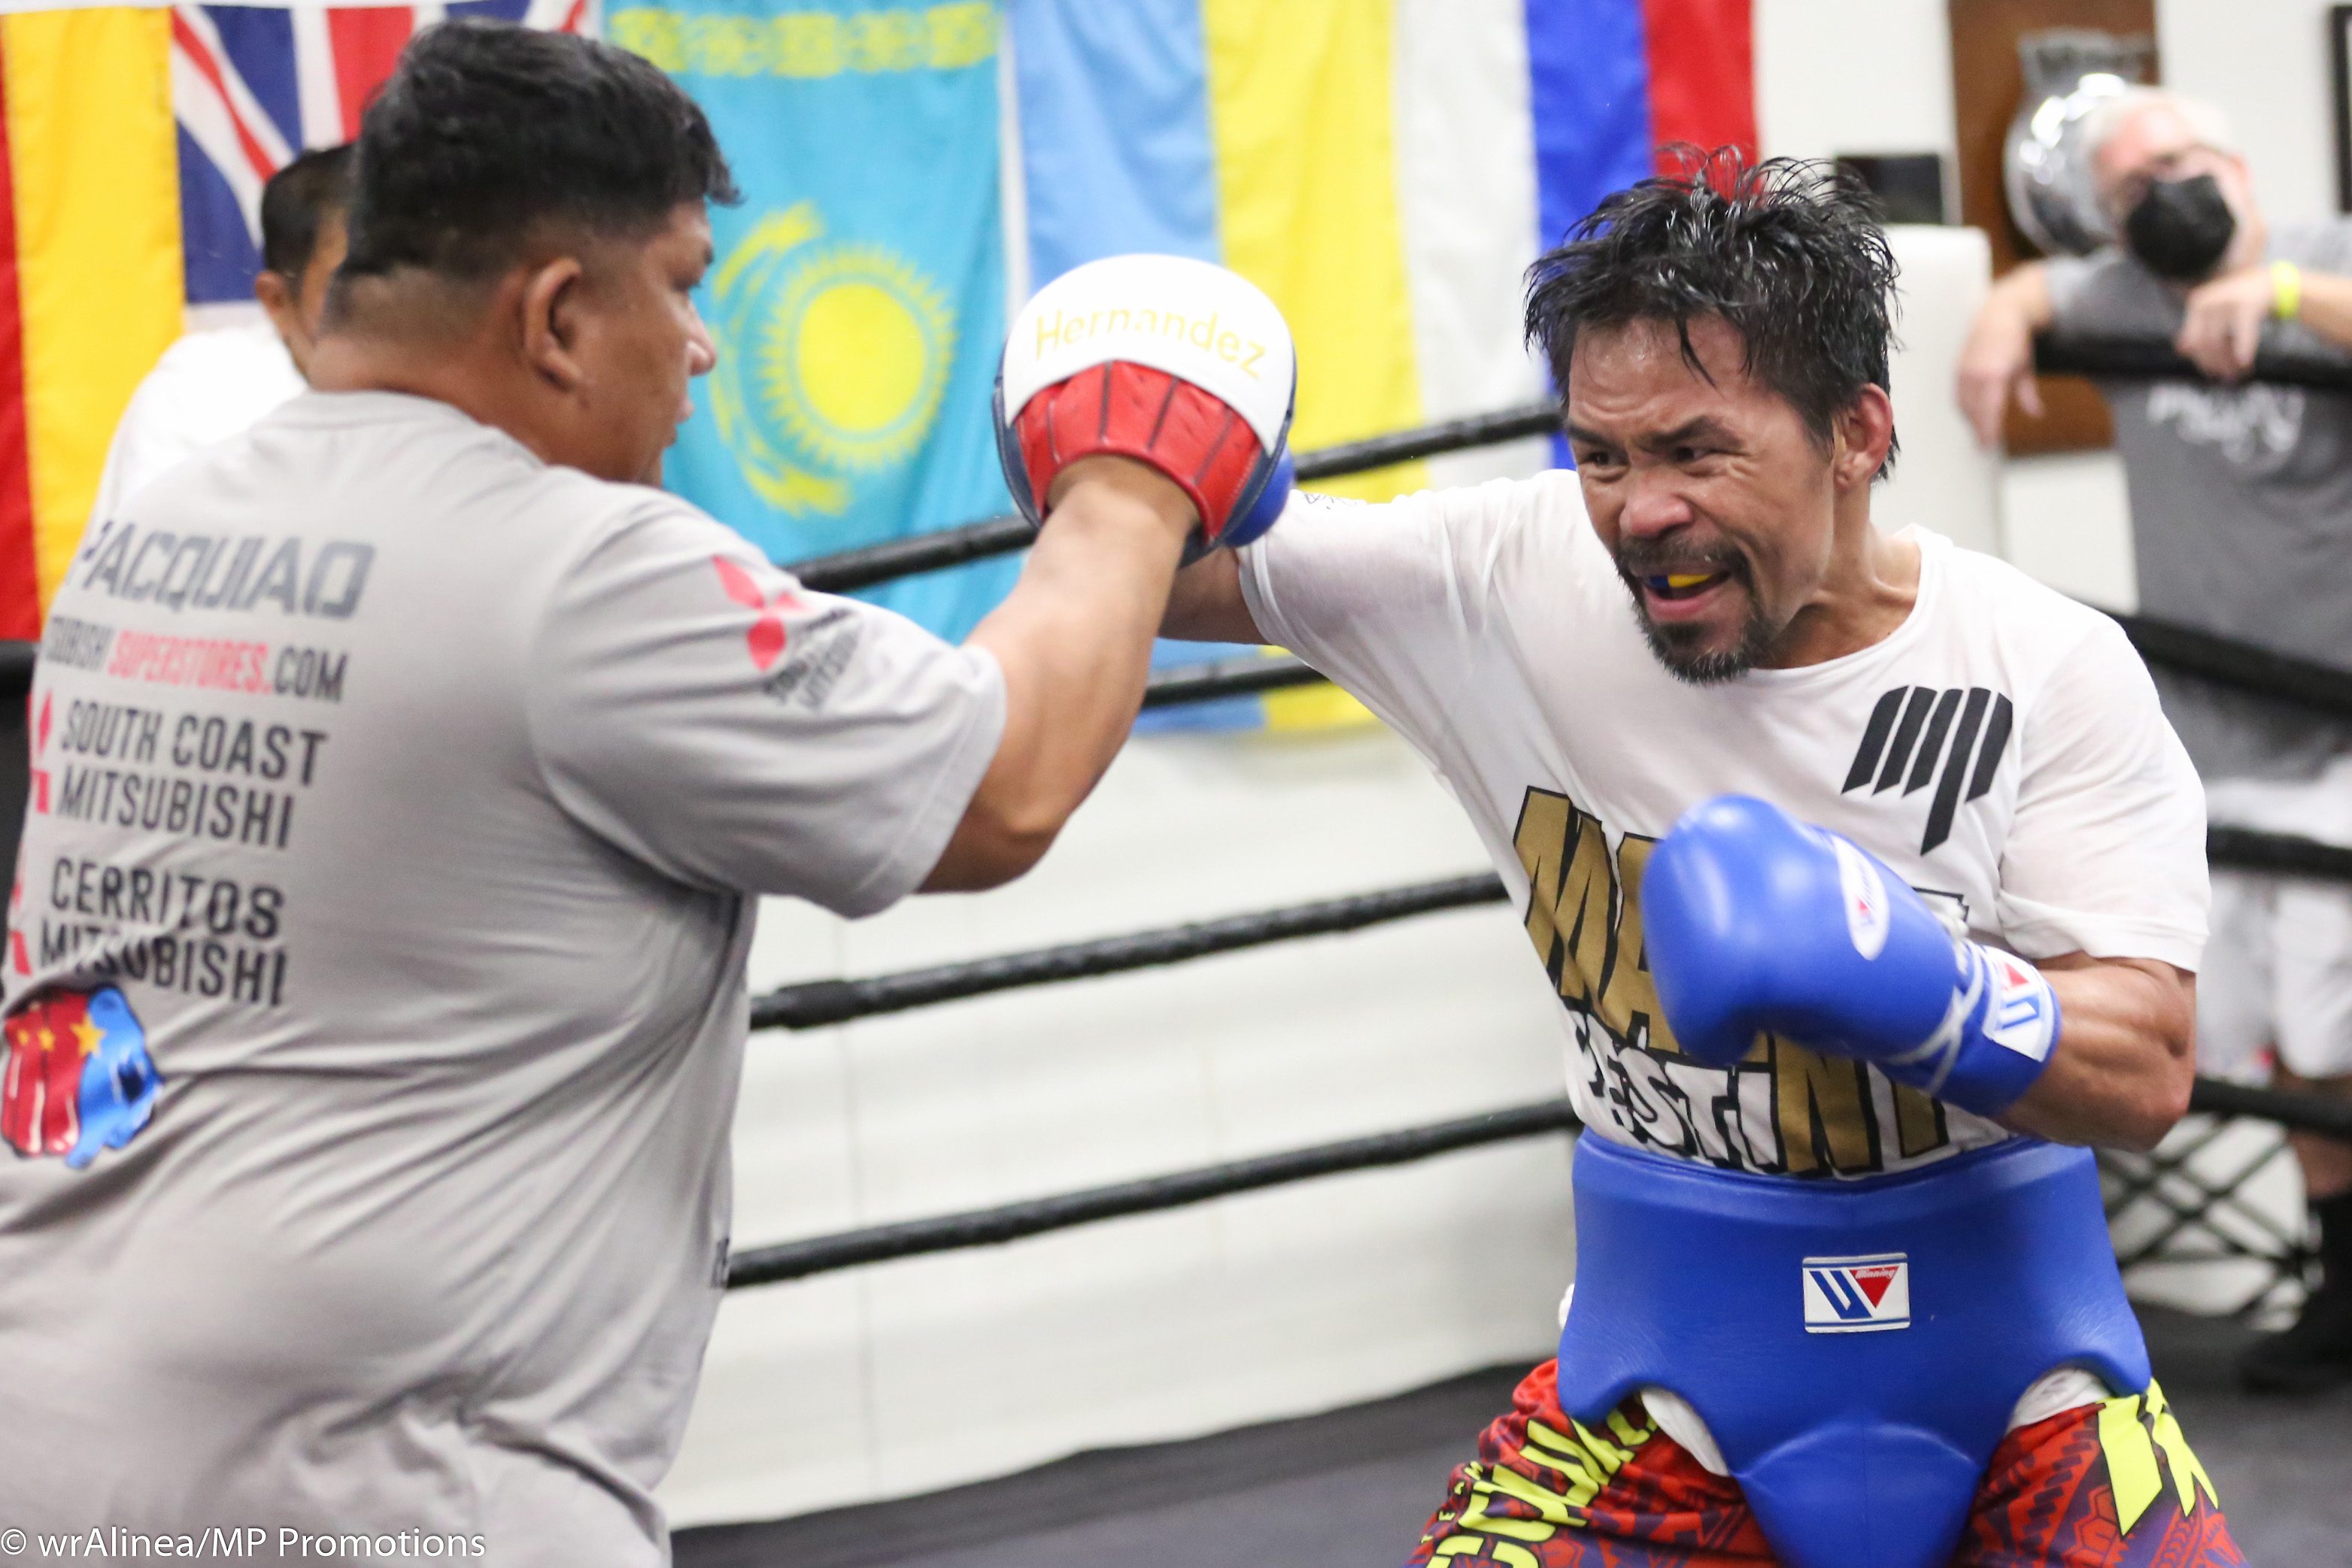 Pacquiao spars 12 rounds, does 31 overall in training for Spence